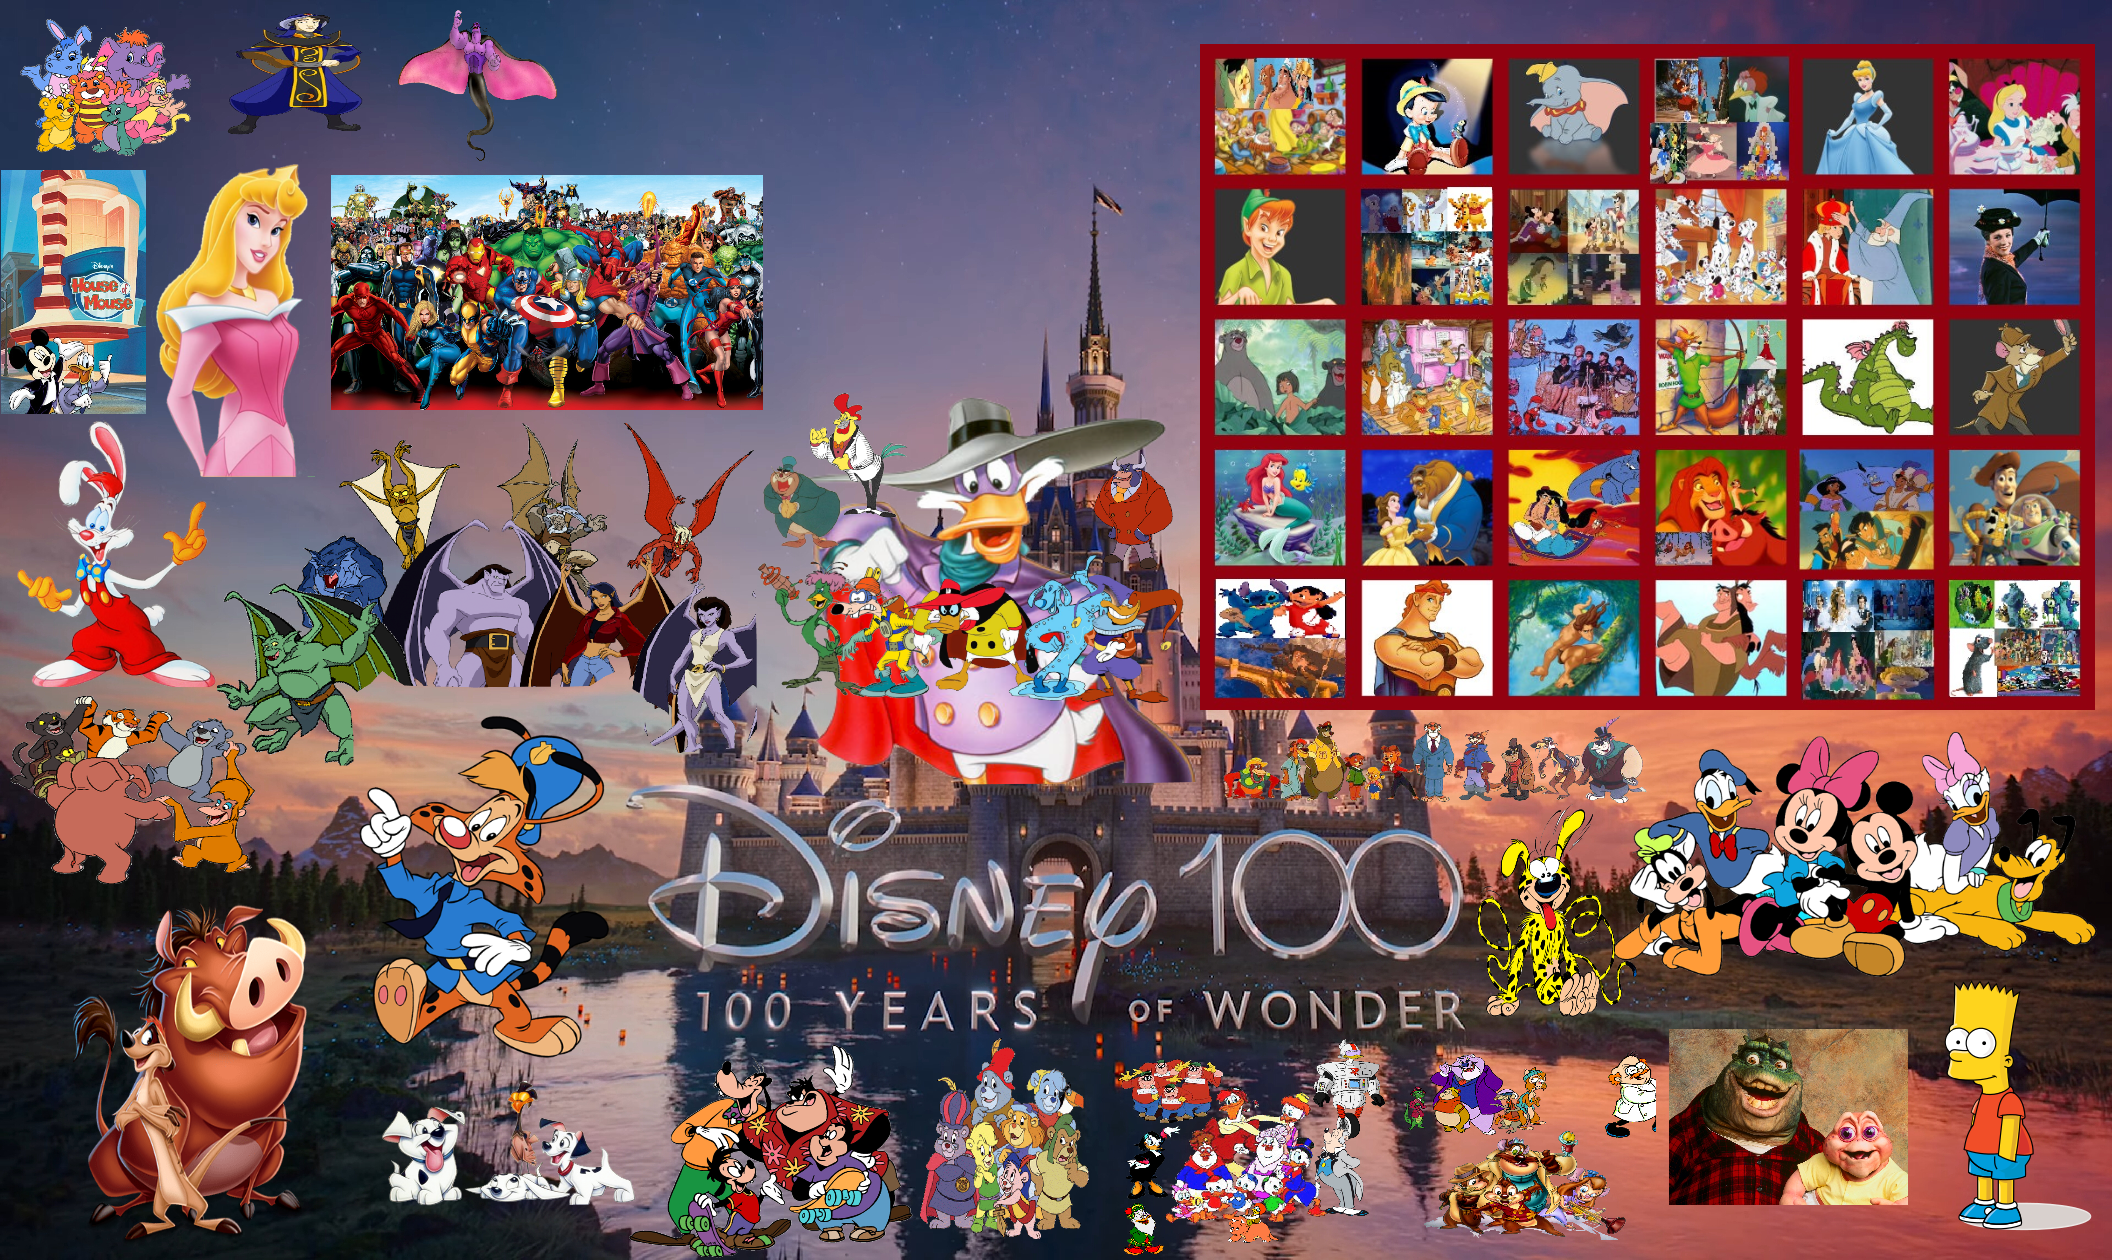 Disney 100 Years of Wonder - Movies and TV Shows by Bart-Toons on DeviantArt